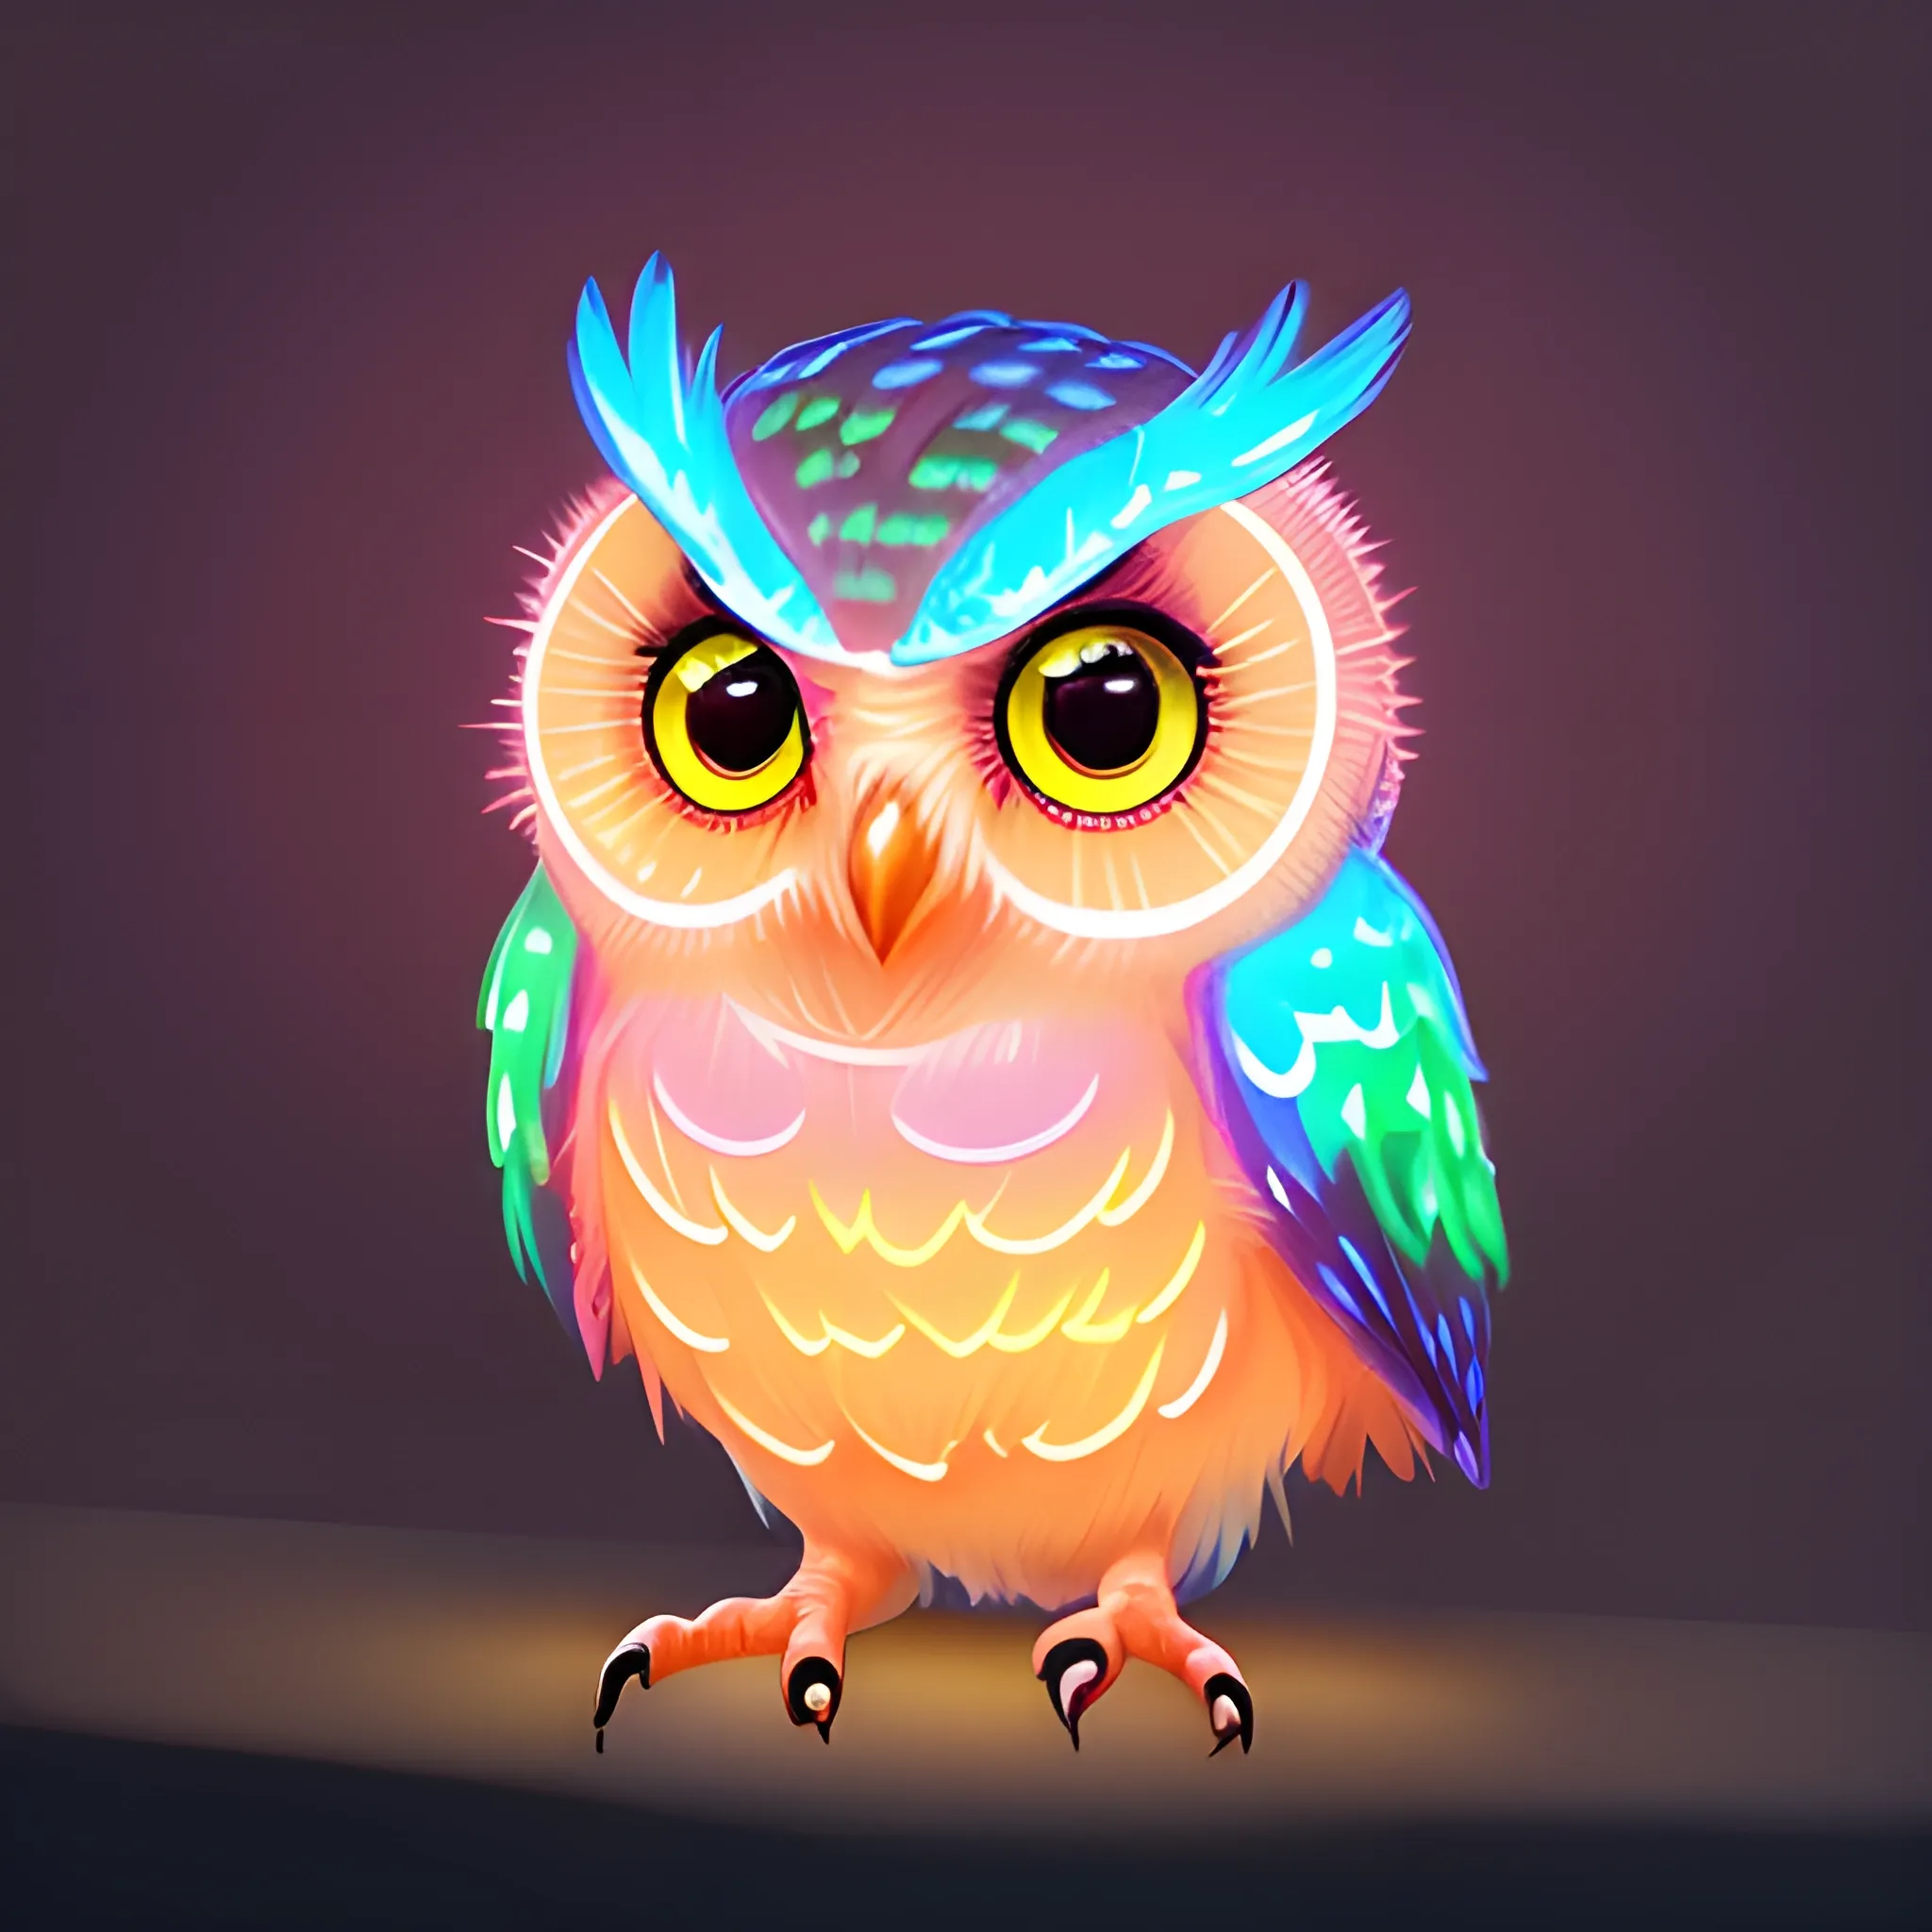 Pixar style bright sparkling twinkling bright neon cute very bright neon colored fluffy OWL surrounded by luminous floating pink sparkles, red, orange yellow, high detail, volumetric lighting, HD, 8K, adorable, wlop, by Lius Lasahido, Michal Lisowski; Insanely detailed front view close-up portrait painting of a Neon coloured Owl; the Owl's appearance: playful, cute, adorable, fluffy feathers, round golden eyes, sharp beak, Genres: Whimsical, Fantasy; Styles: Cartooncore; Techniques: Hyperrealism, Impressionism